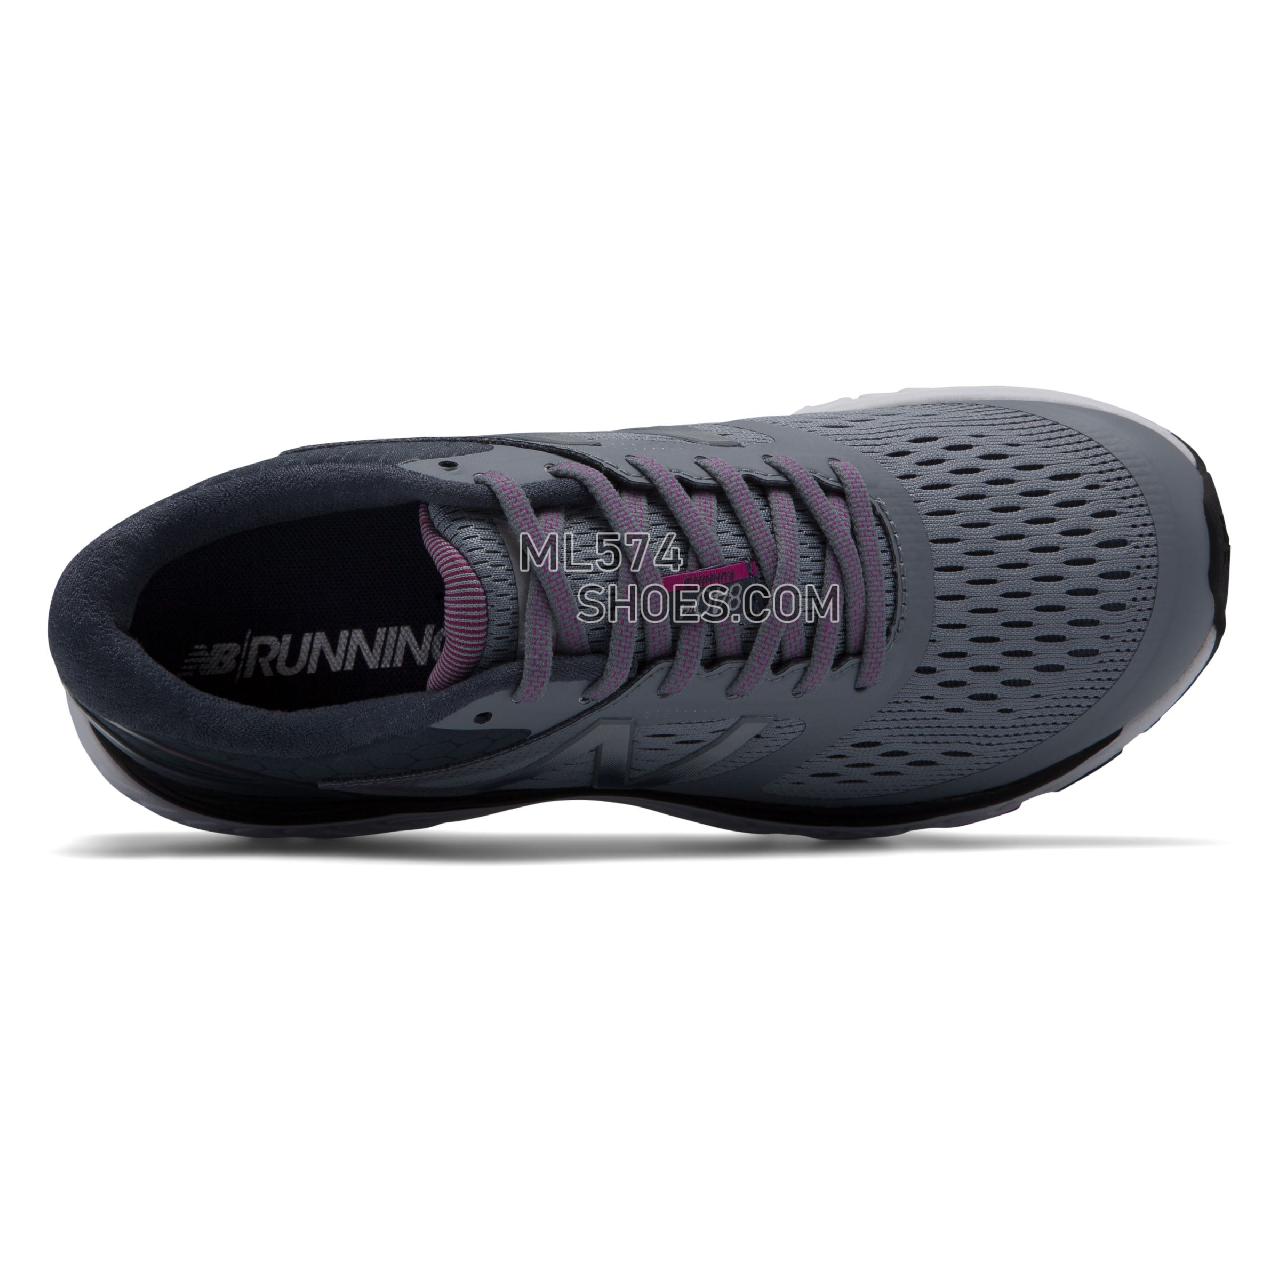 New Balance 840v4 - Women's 840 - Running Cyclone with Poisonberry - W840GO4